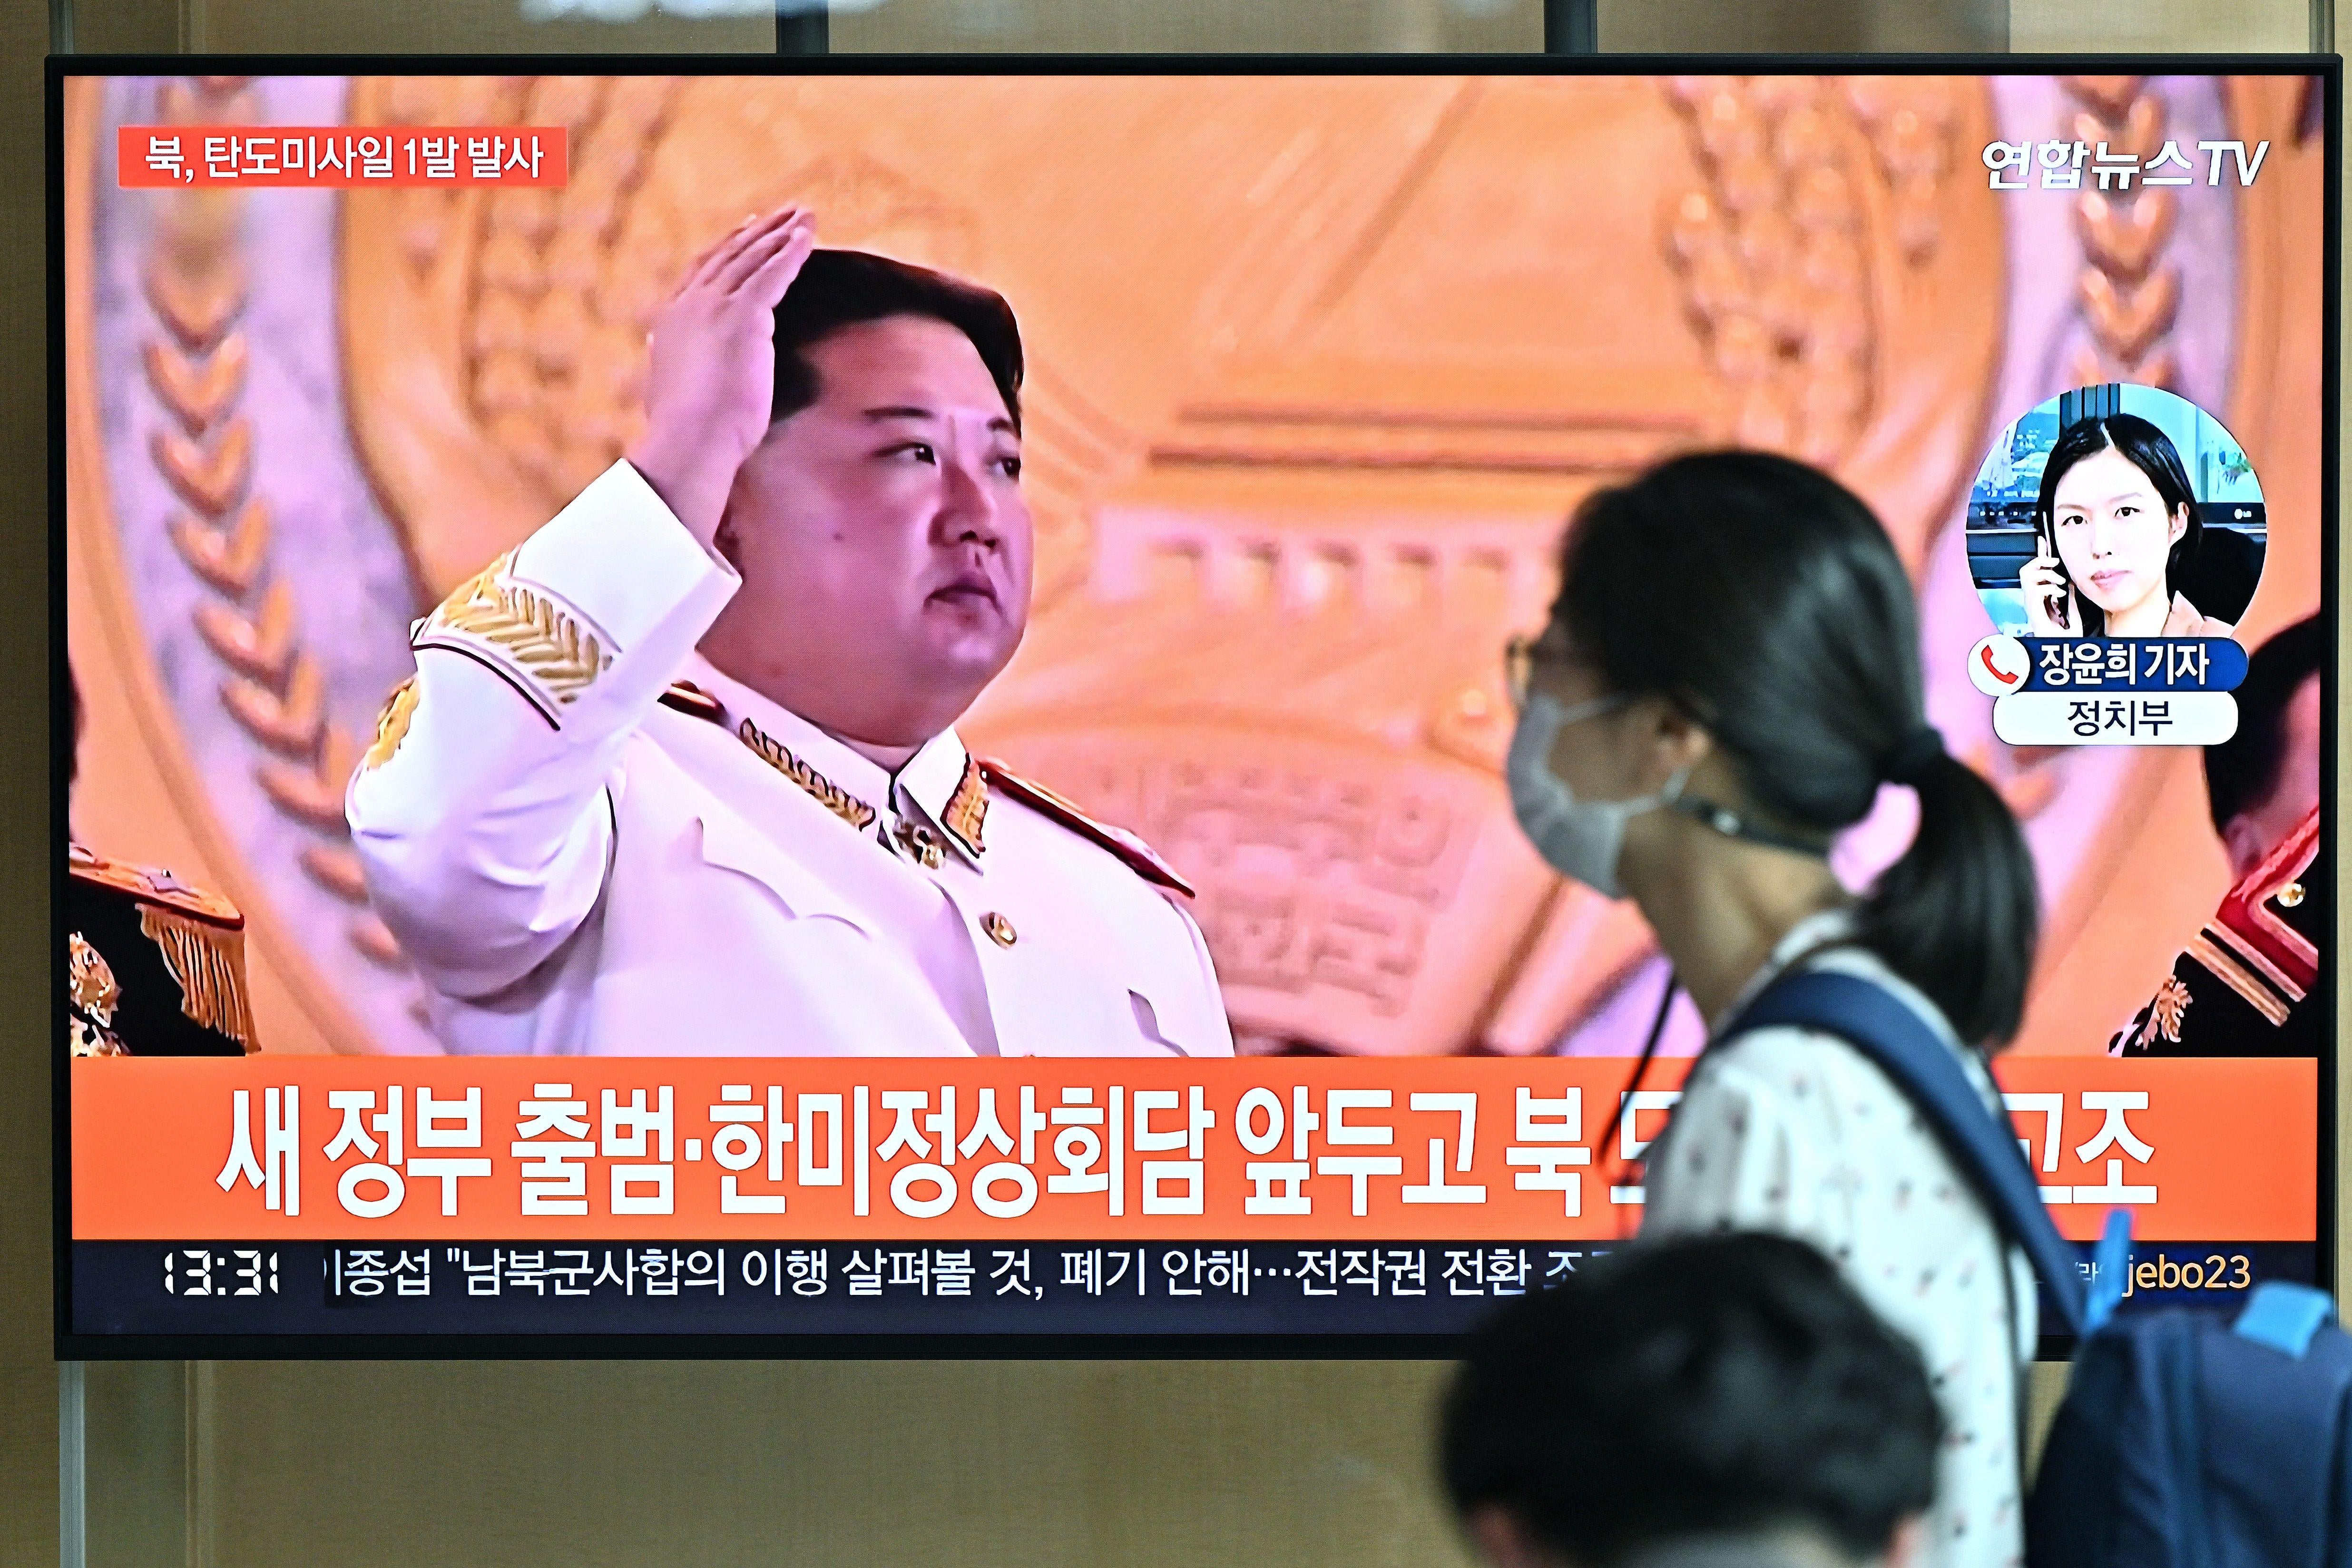 TOPSHOT - A woman walks past a television screen showing a news broadcast with file footage of North Korean leader Kim Jong Un, at a railway station in Seoul on May 4, 2022. - North Korea fired a ballistic missile on May 4, South Korea's military said, just a week after leader Kim Jong Un vowed to boost Pyongyang's nuclear arsenal at the "fastest possible speed". (Photo by Jung Yeon-je / AFP) (Photo by JUNG YEON-JE/AFP via Getty Images)